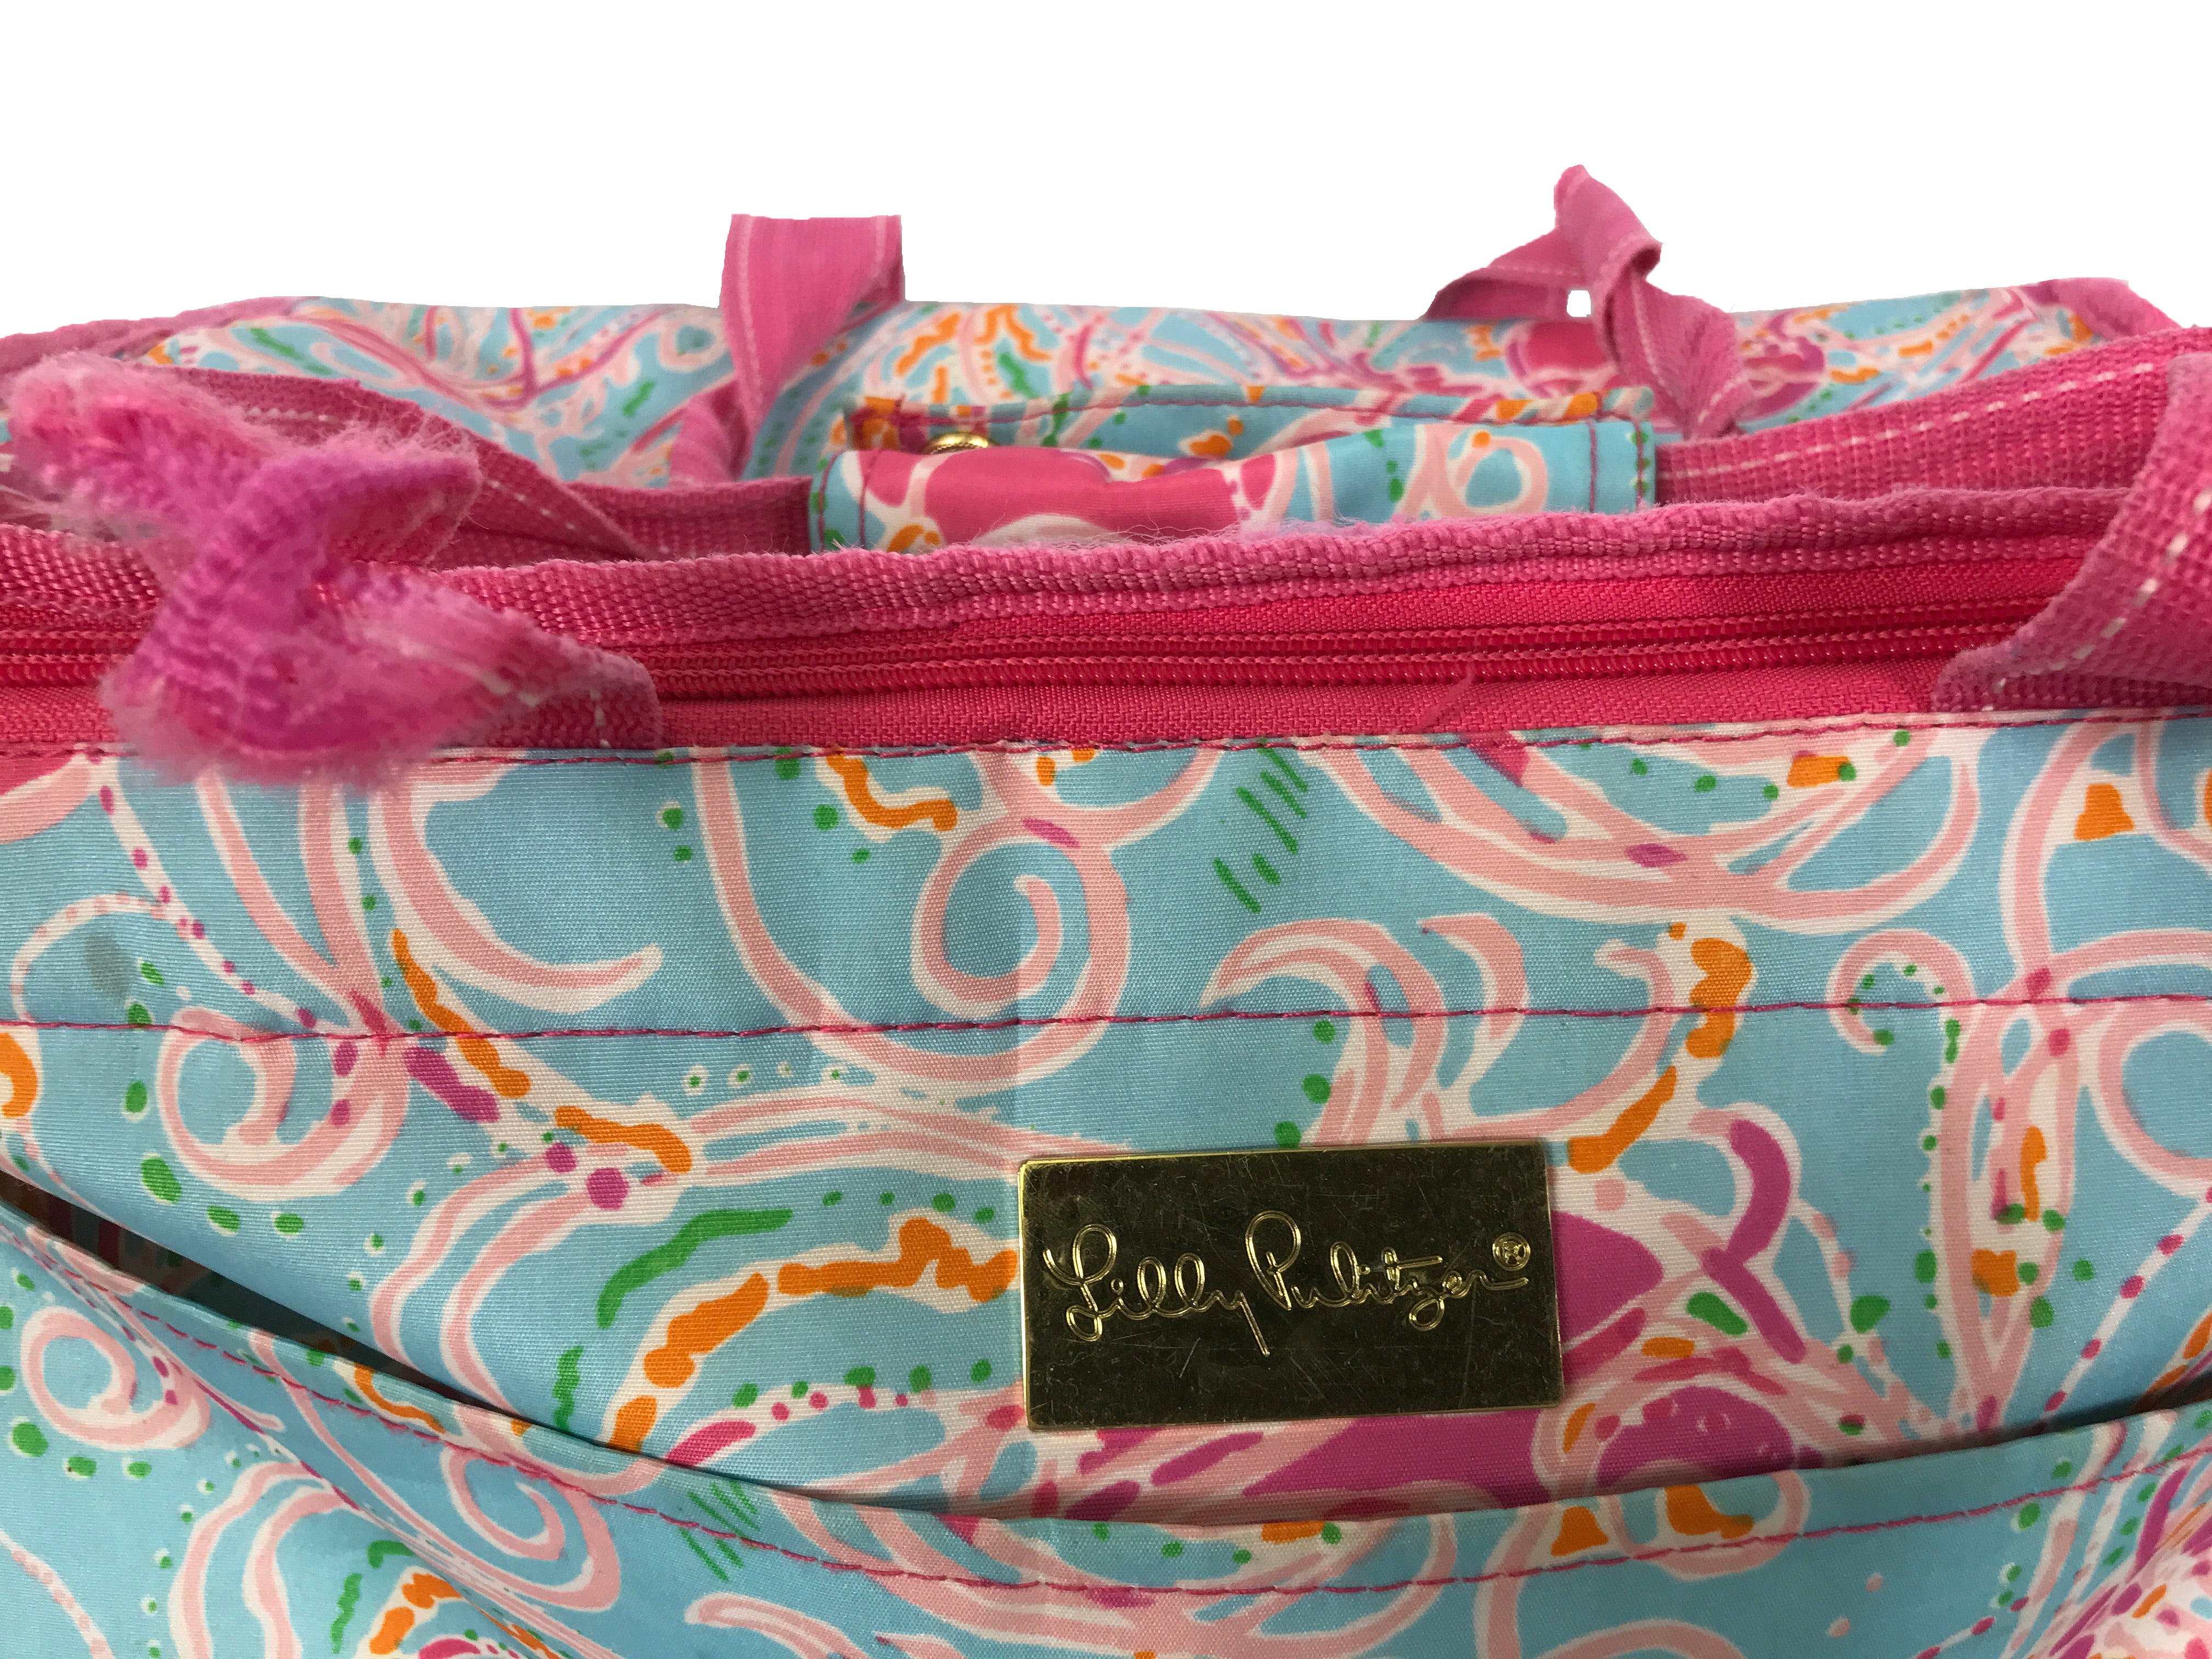 Lilly Pulitzer "Jellies Be Jamin" Insulated Cooler Bag